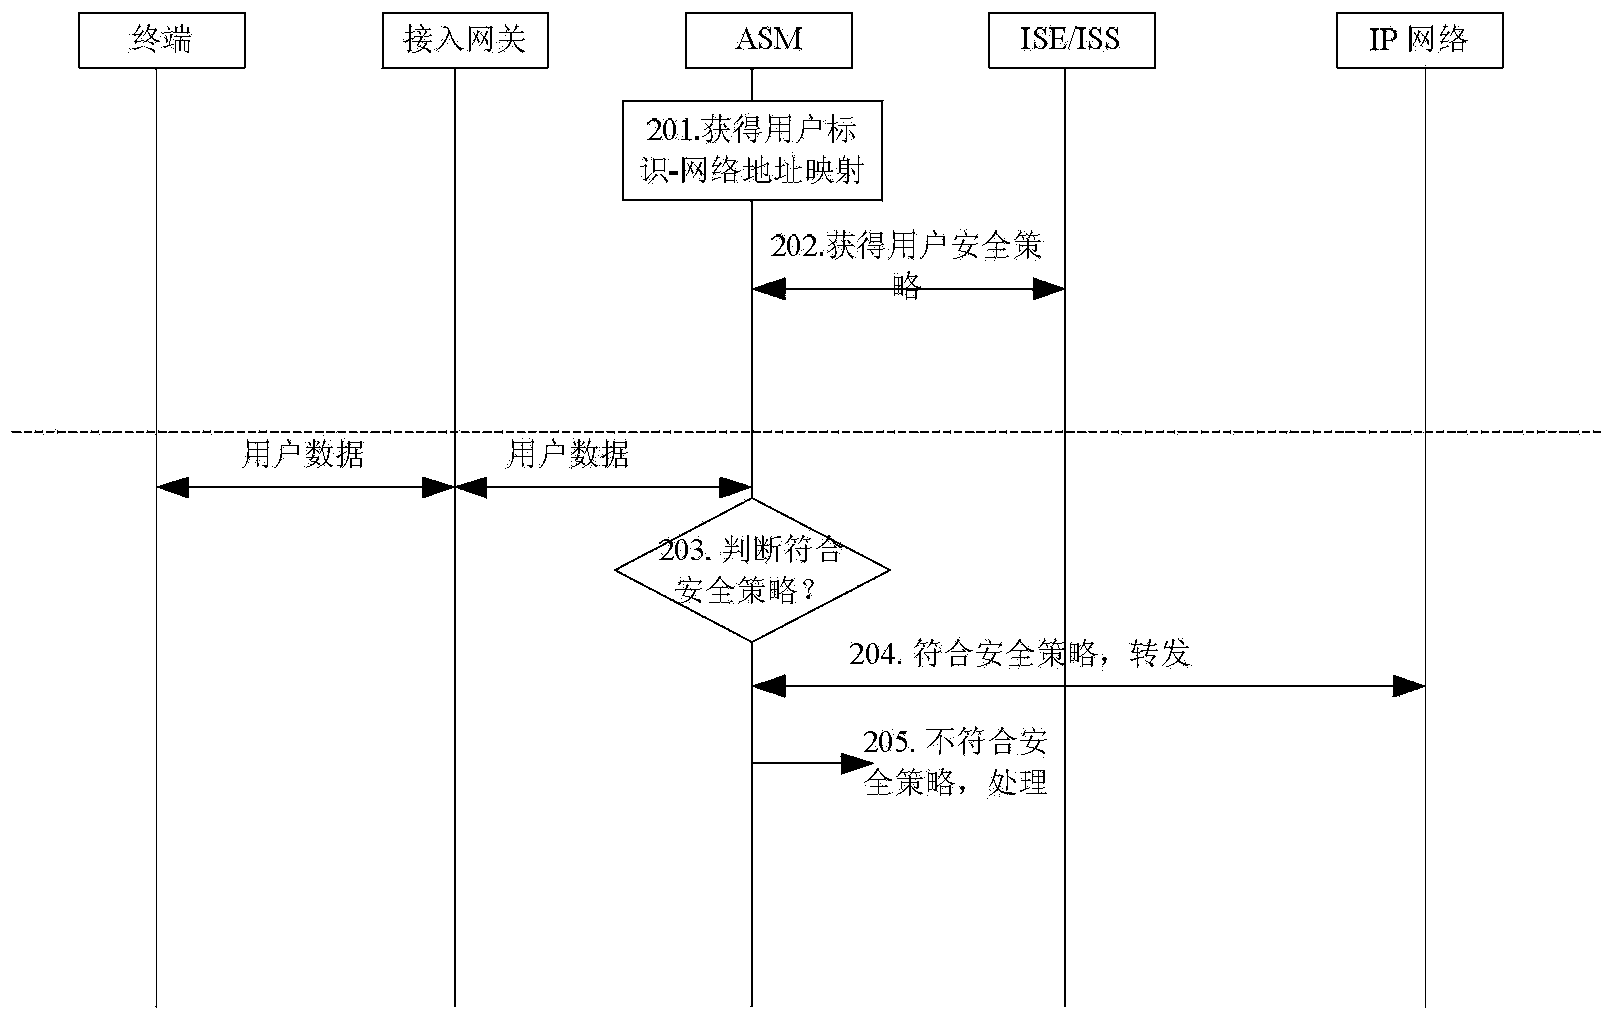 Network security monitoring method and system